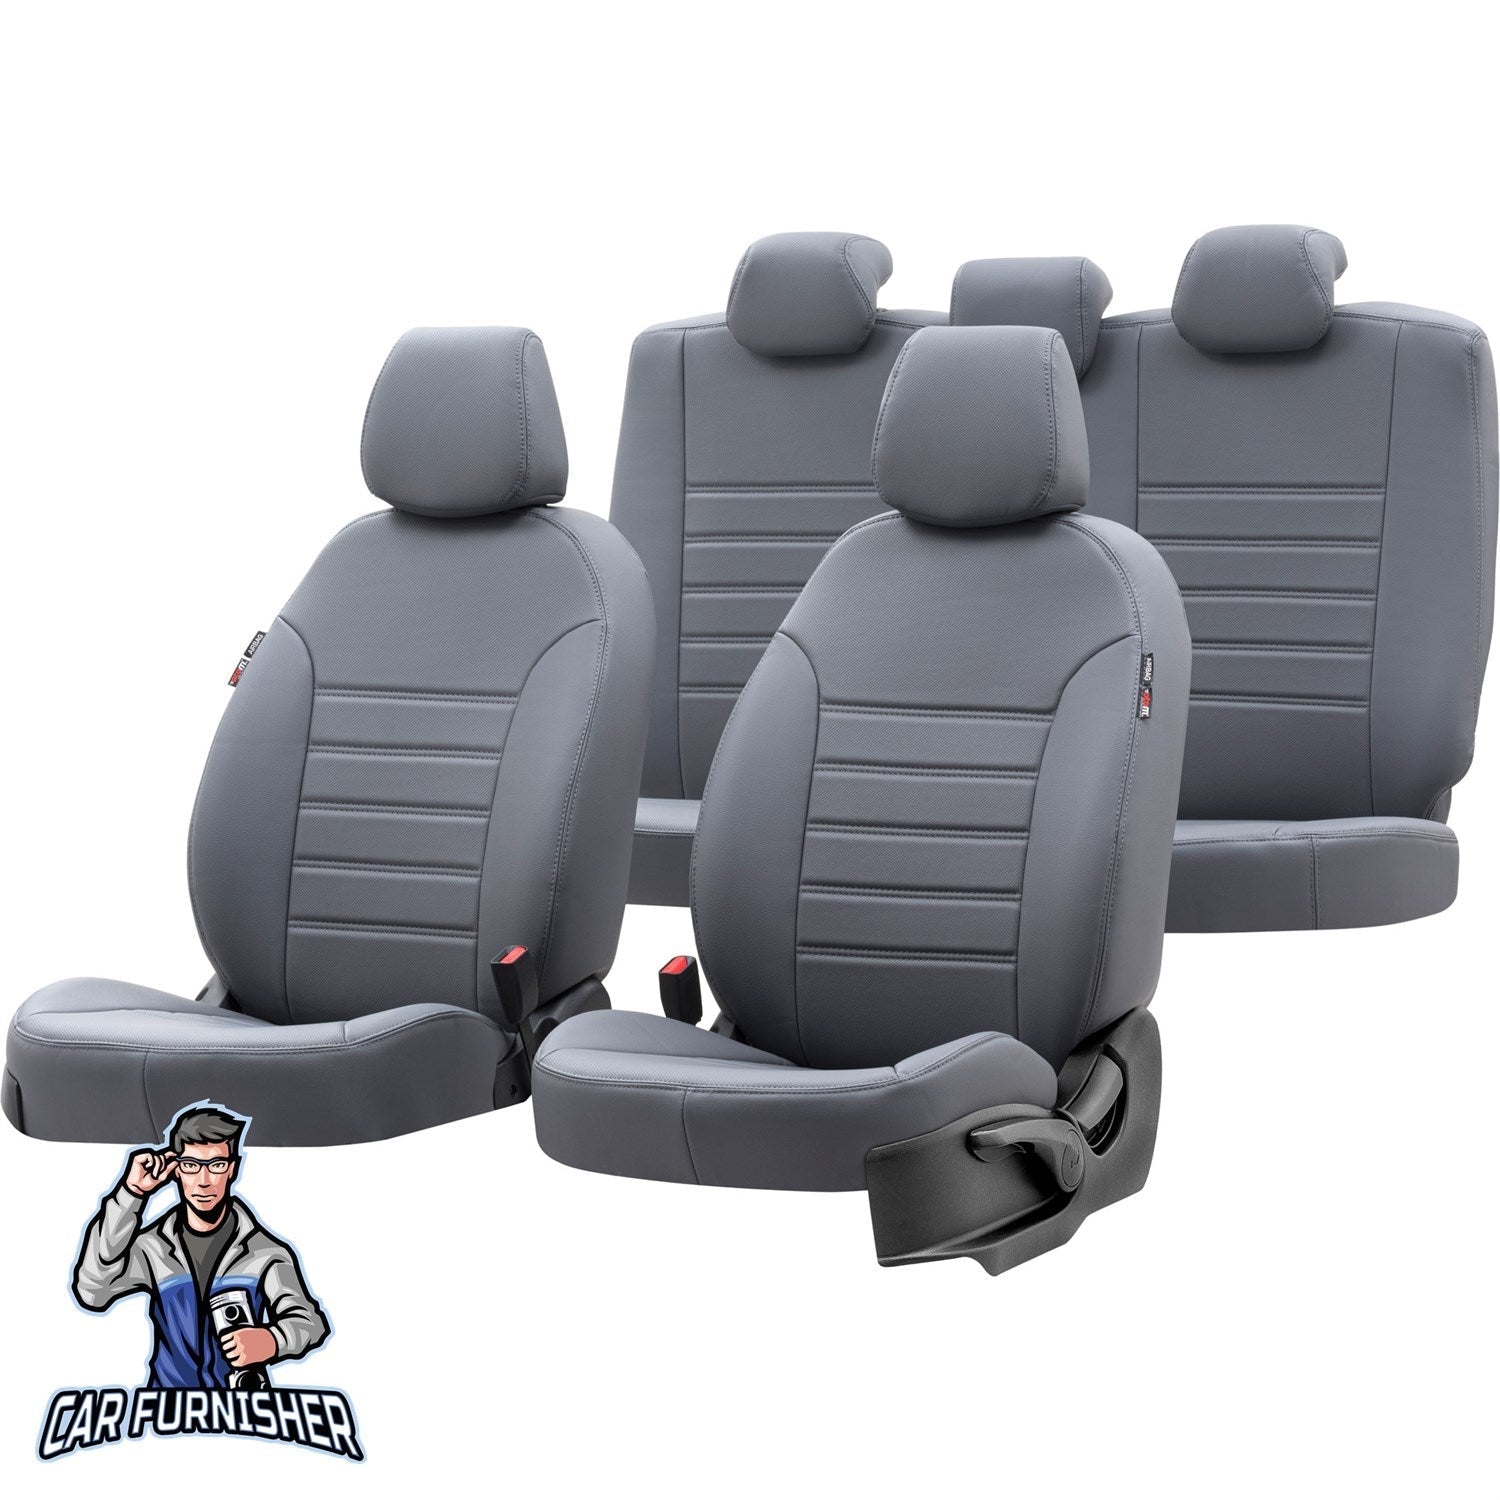 Isuzu D-Max Seat Covers Istanbul Leather Design Smoked Leather